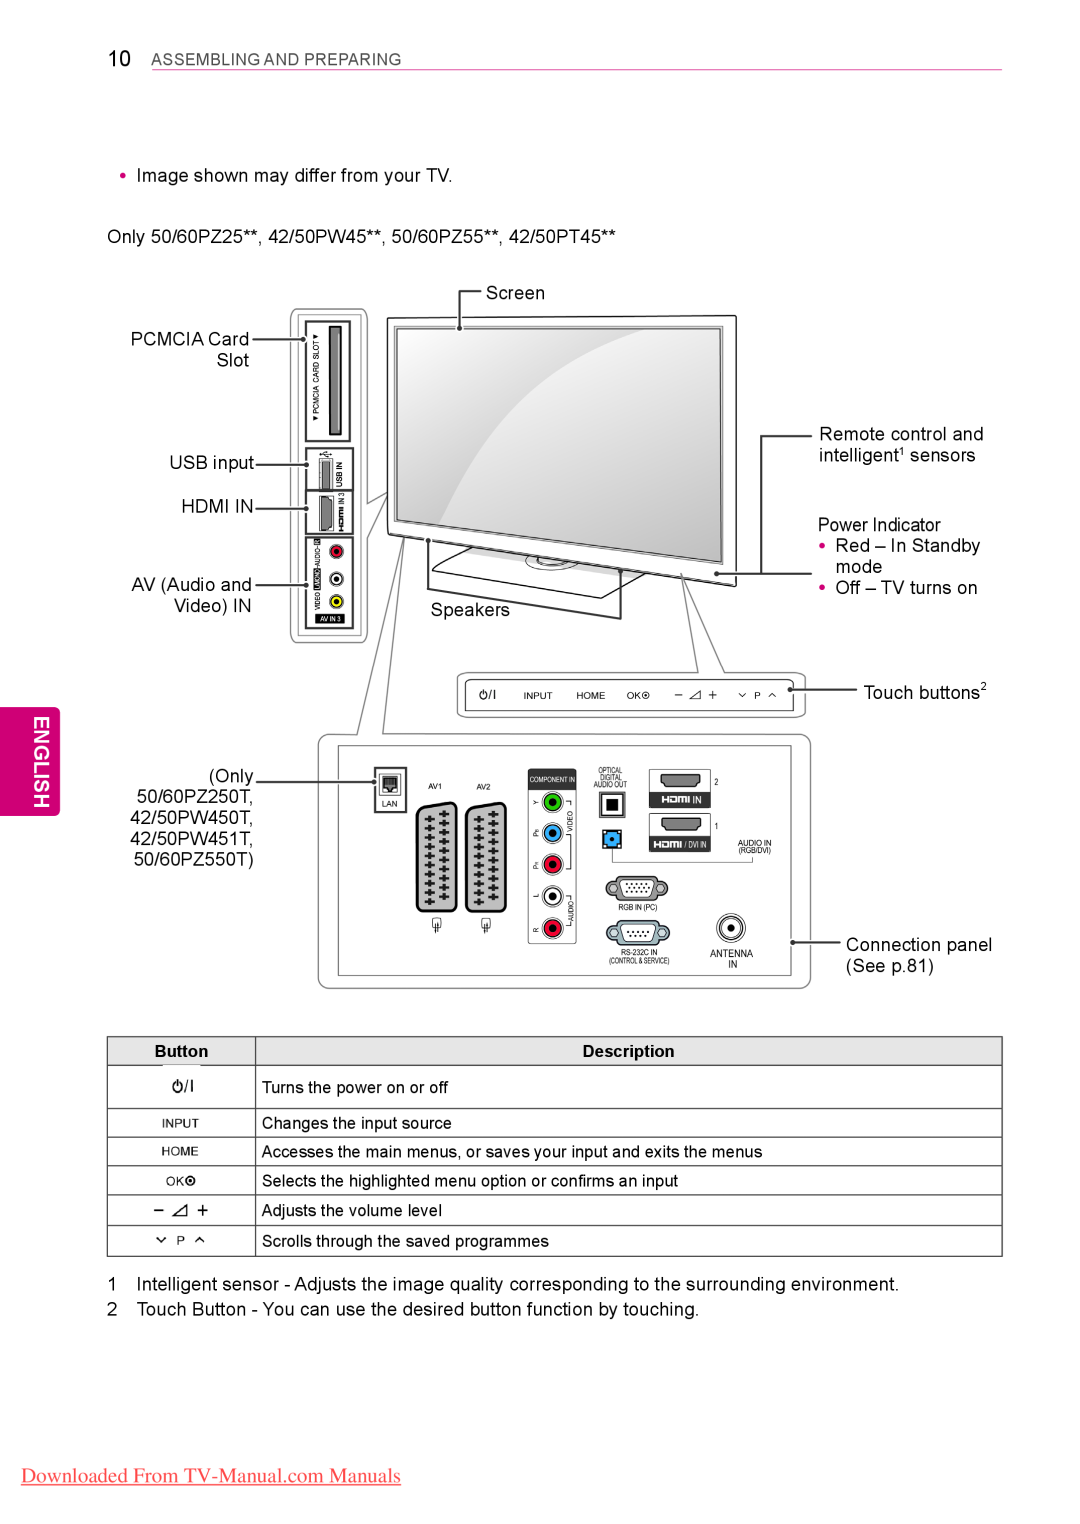 LG Electronics 42/50PW45**, 50PV35** English, Downloaded From TV-Manual.com Manuals, yyImage shown may differ from your TV 